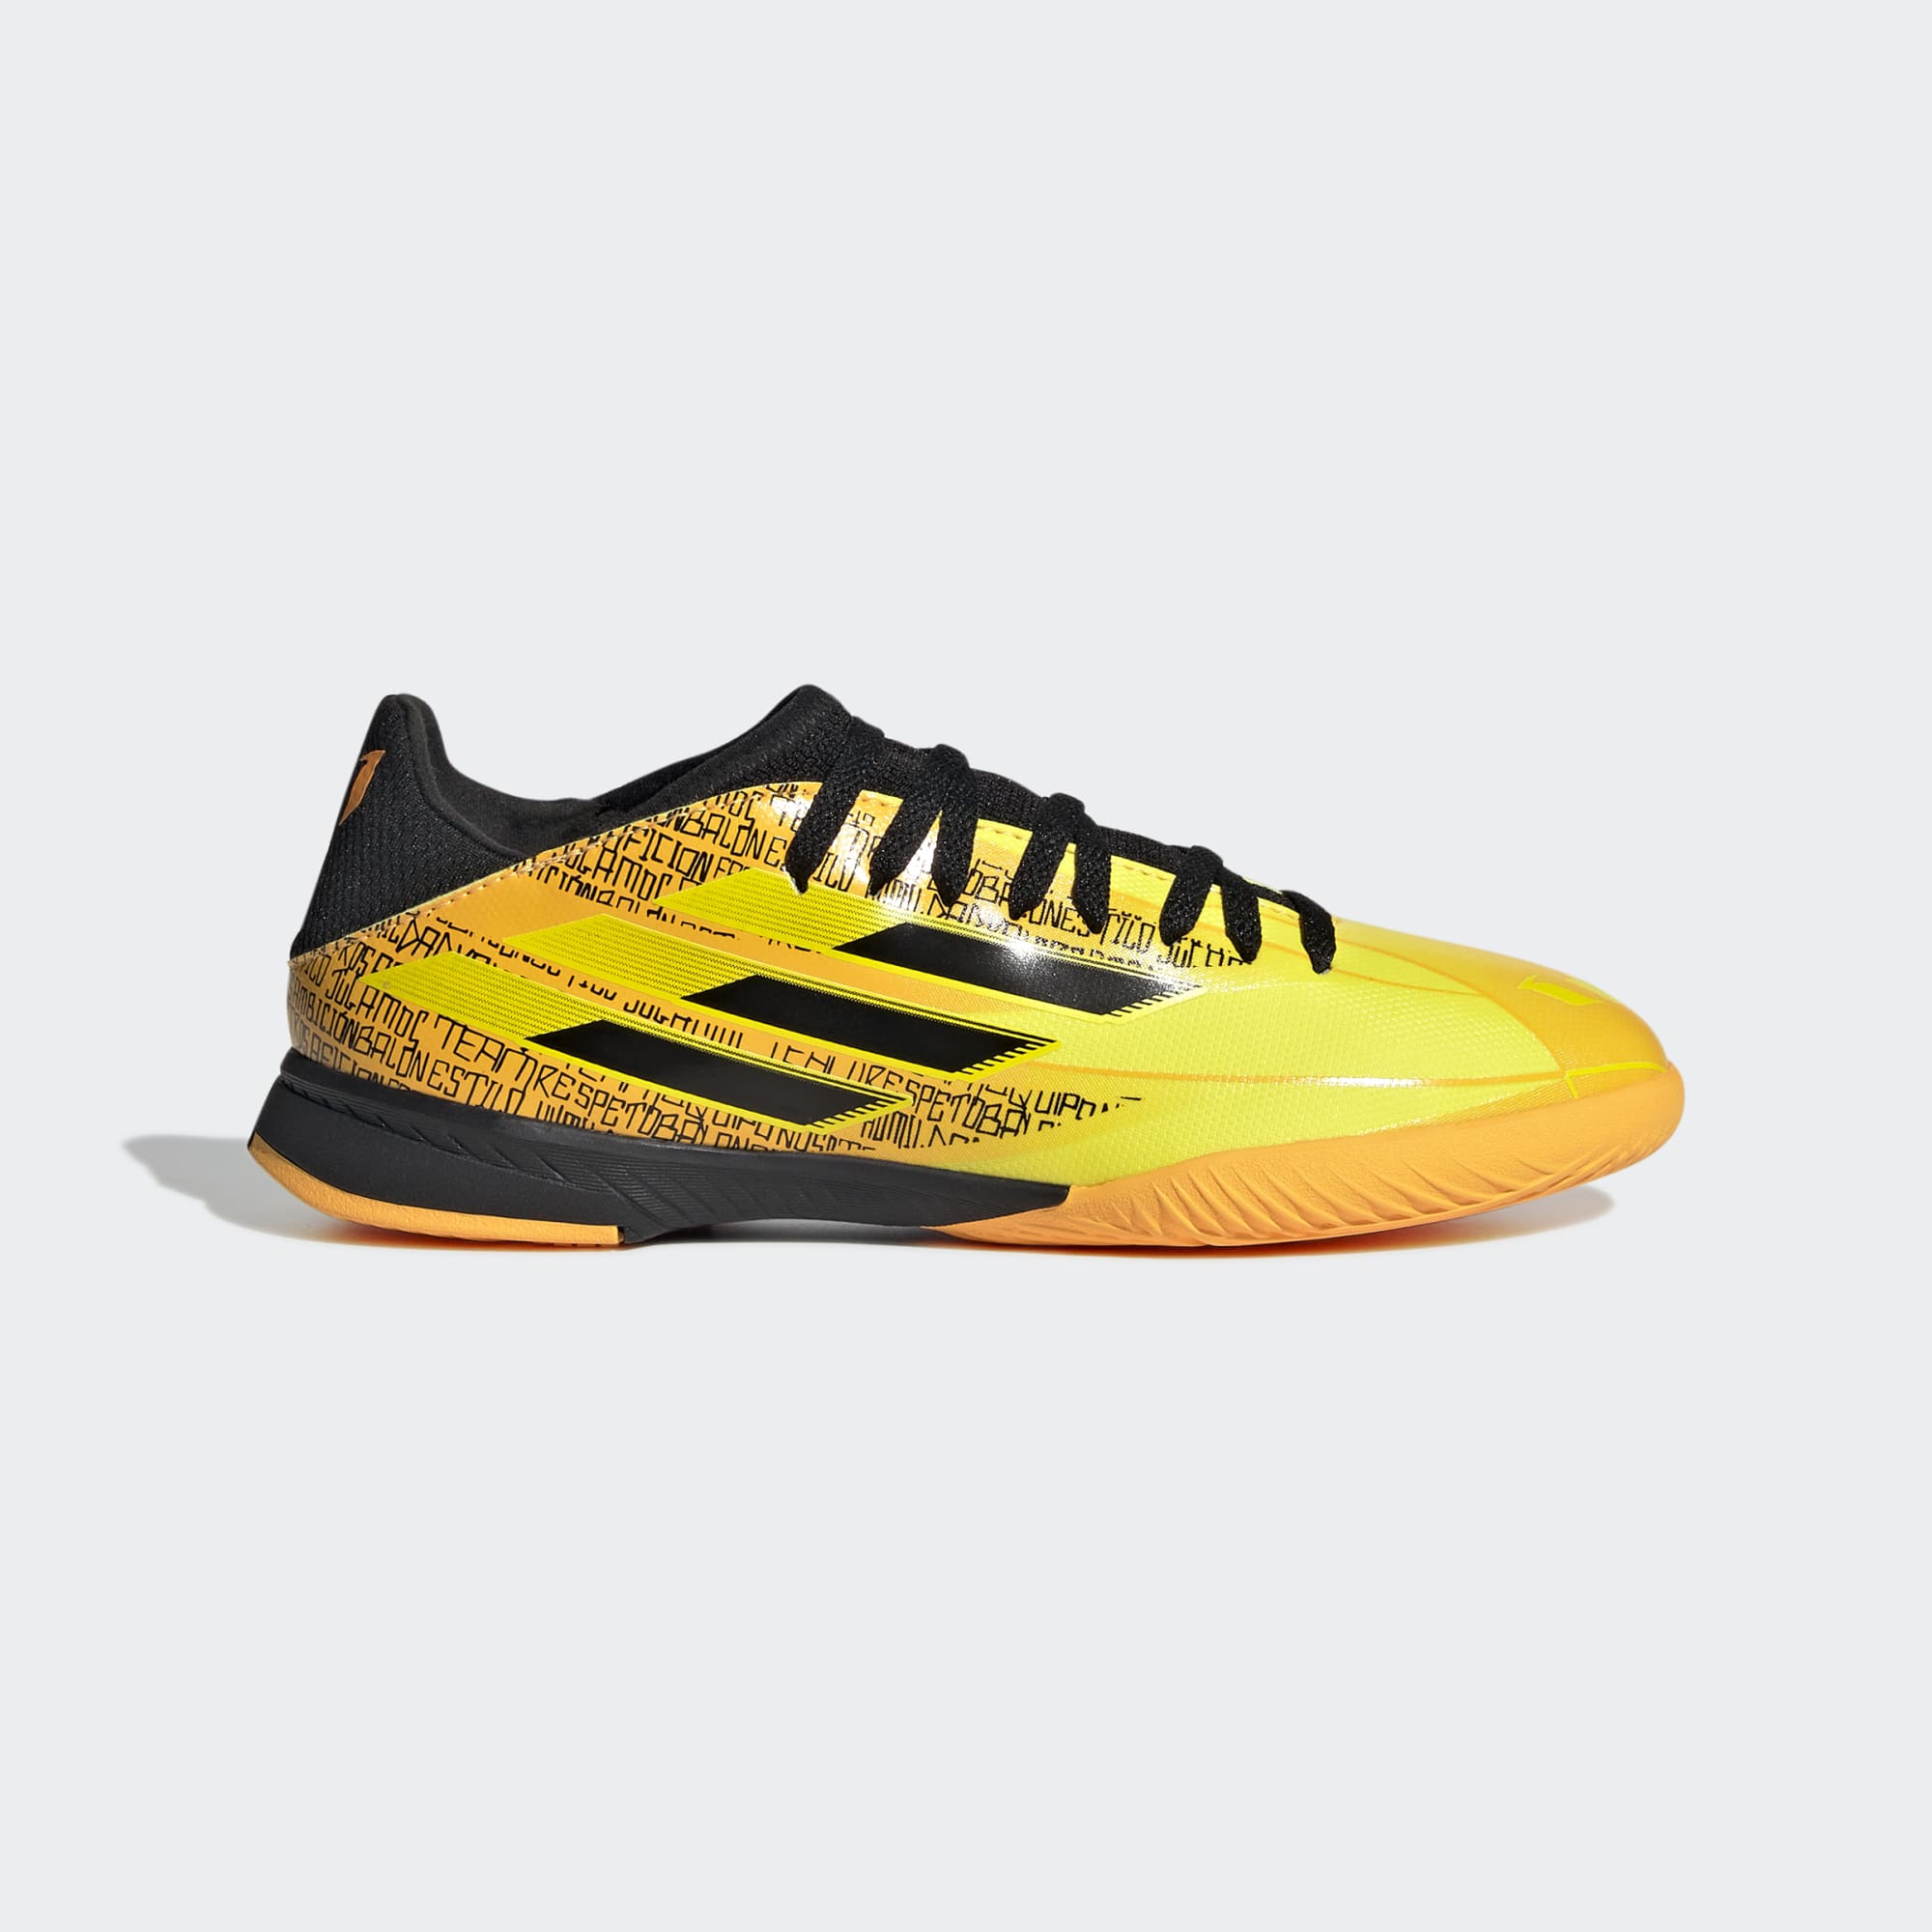 stefanssoccer.com:adidas Youth X SpeedFlow Messi.3 IC Indoor Soccer Shoes - Solar Gold / Core Black / Yellow